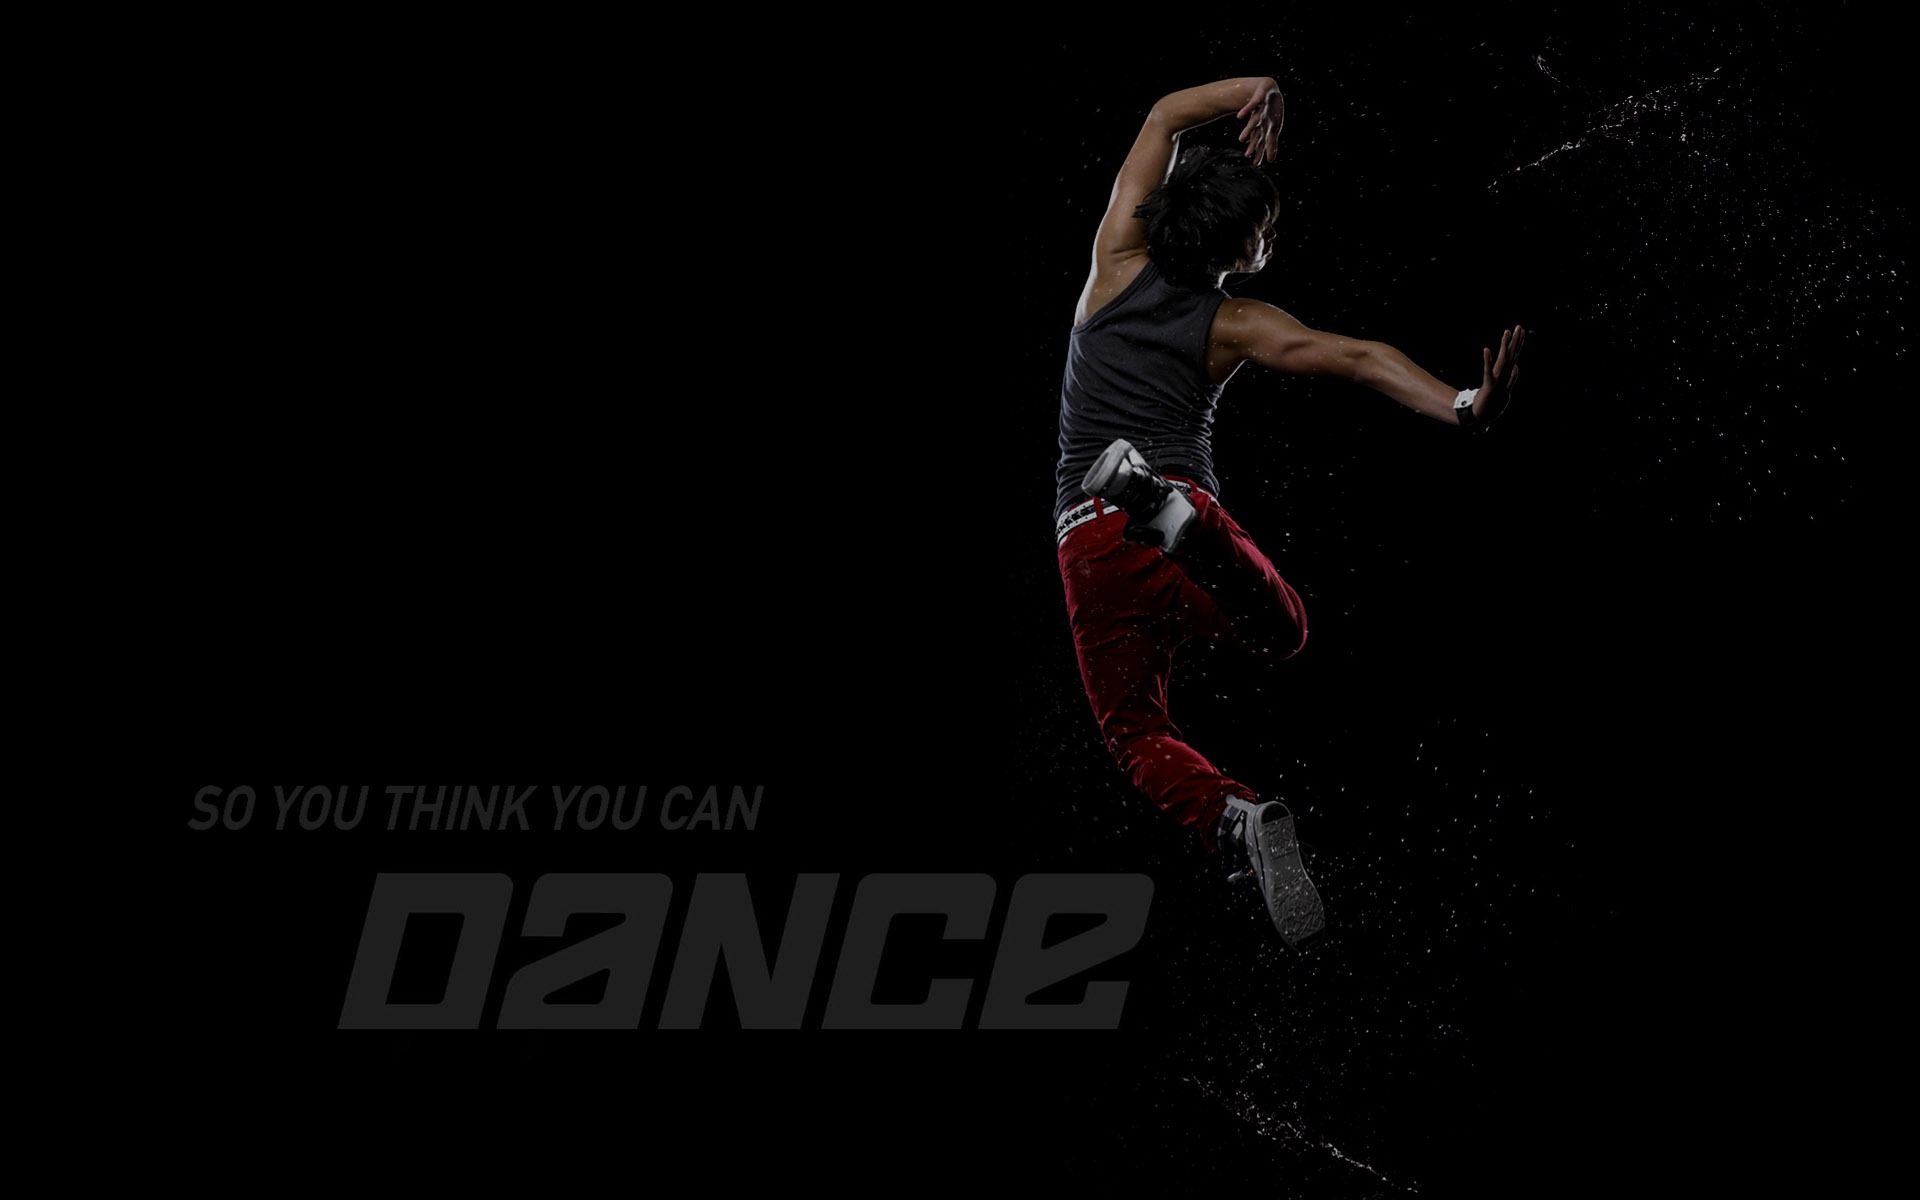 So You Think You Can Dance 舞林爭霸壁紙(二) #12 - 1920x1200